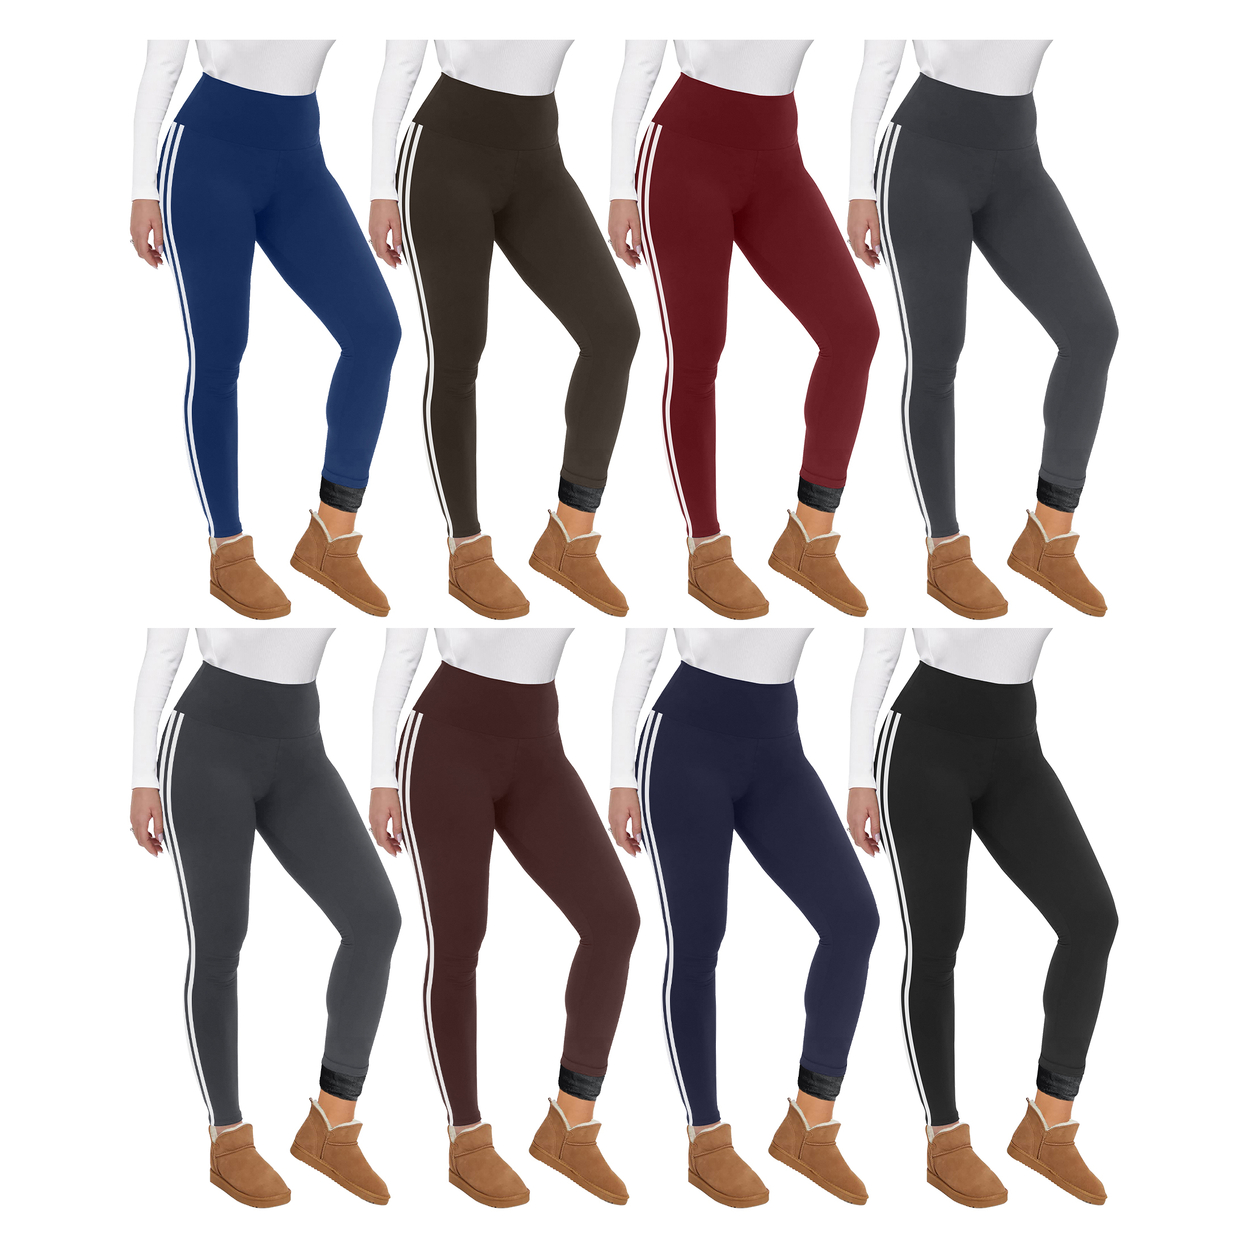 3-Pack: Women's Ultra Soft Winter Warm Cozy Striped Fur Lined Yoga Leggings - Assorted, Large